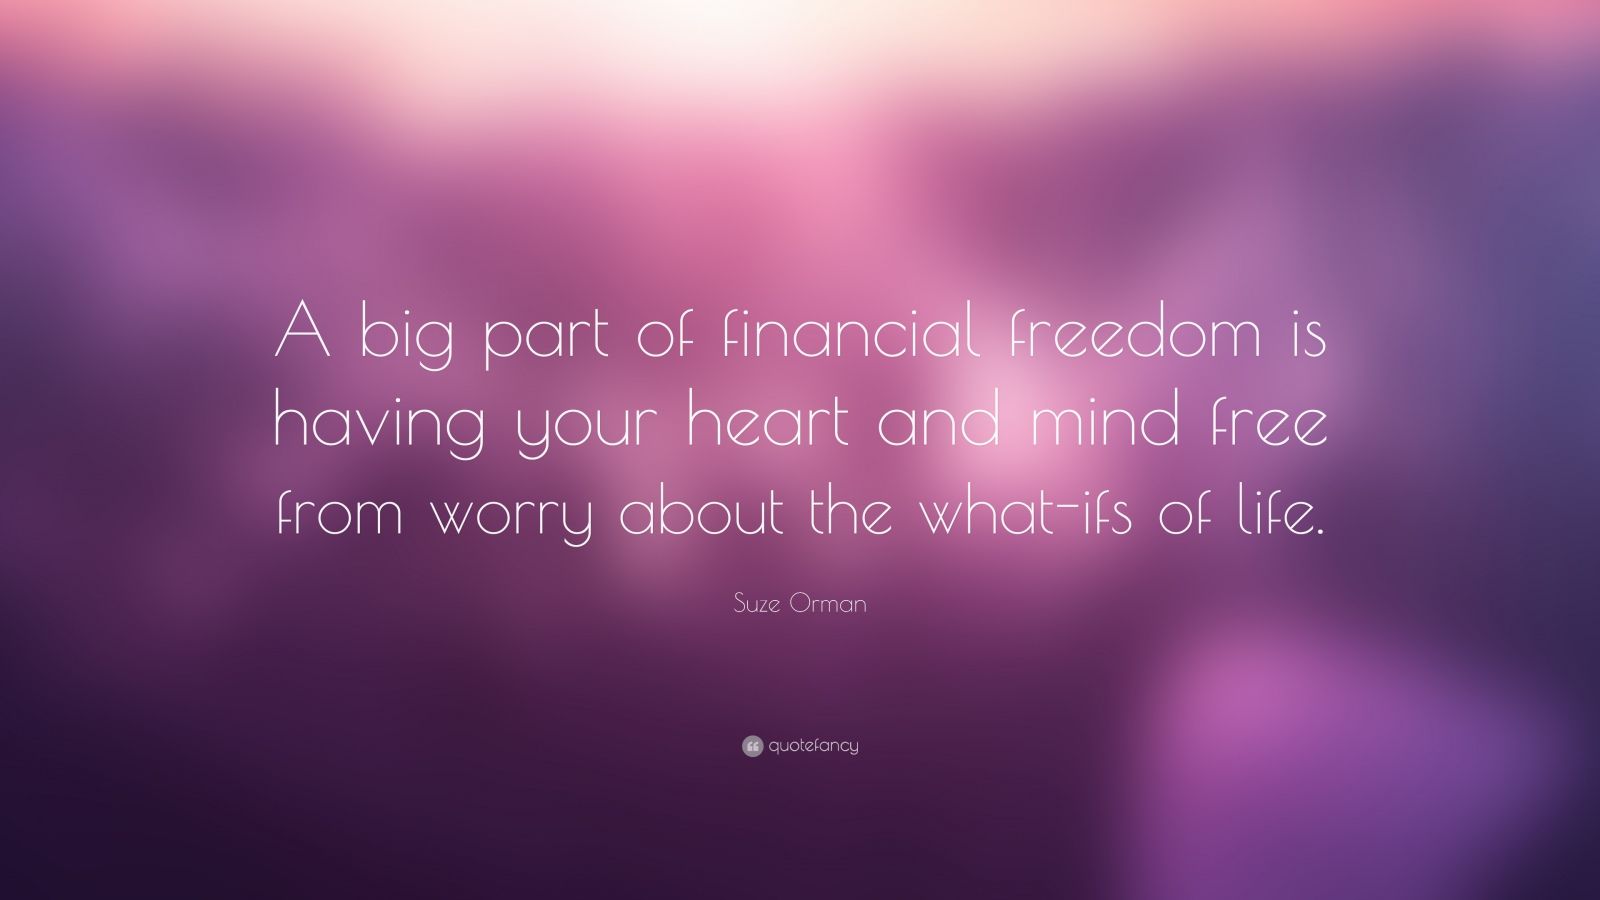 Suze Orman Quote “A big part of financial freedom is